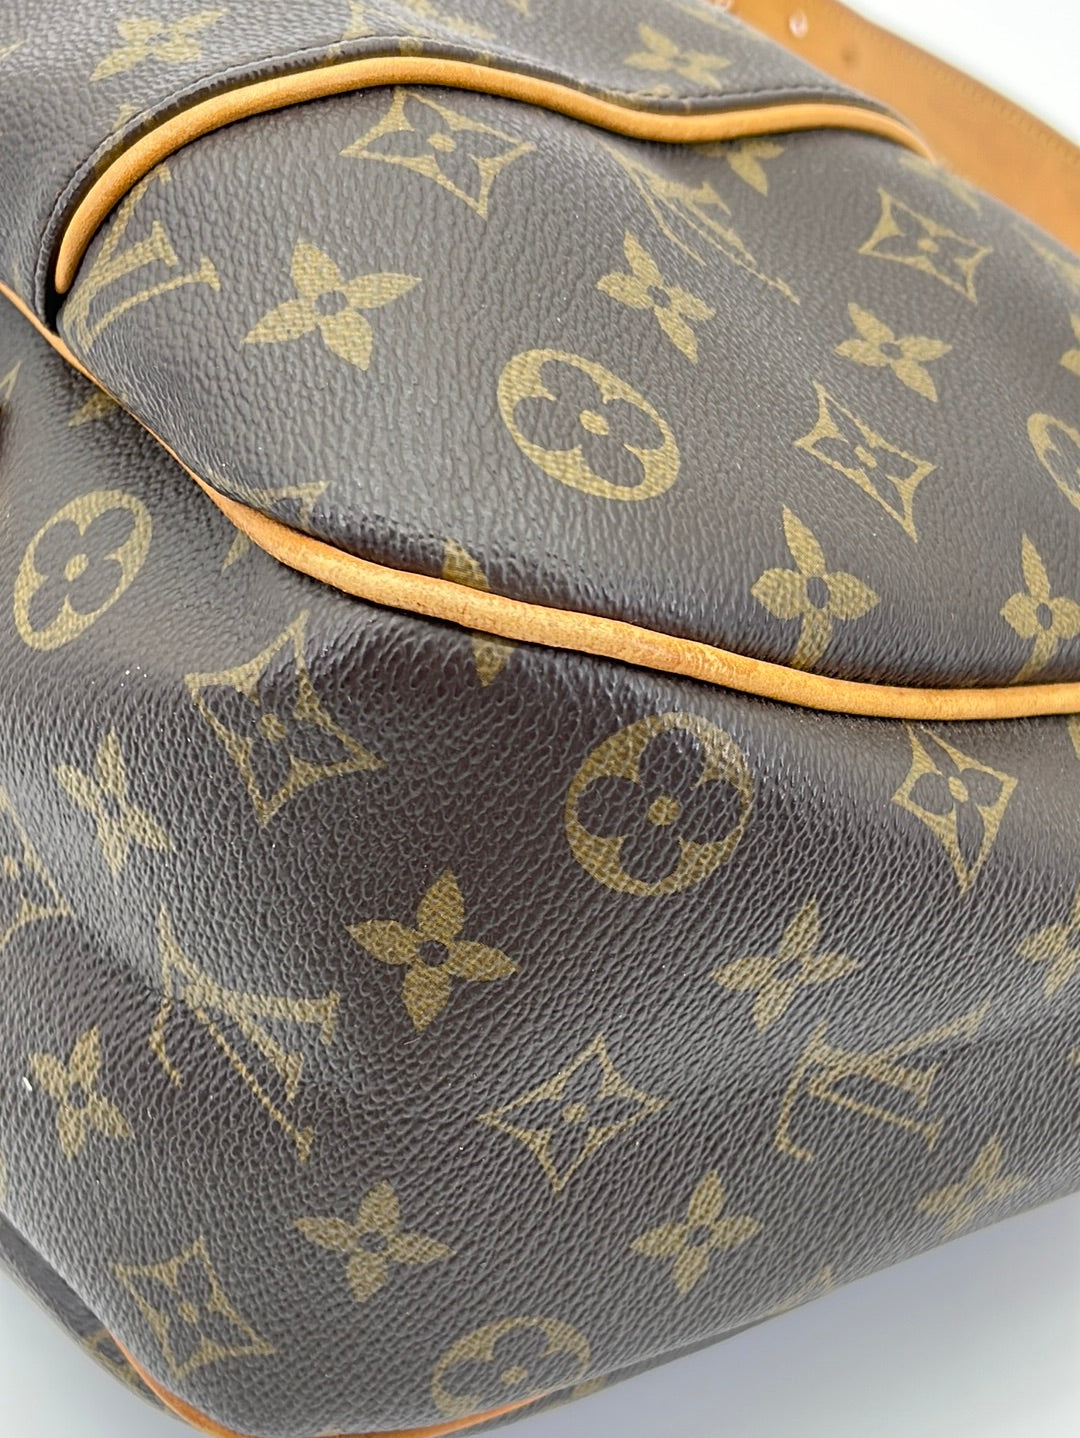 Buy Free Shipping [Used] LOUIS VUITTON District PM Shoulder Bag Monogram  Eclipse M45272 from Japan - Buy authentic Plus exclusive items from Japan